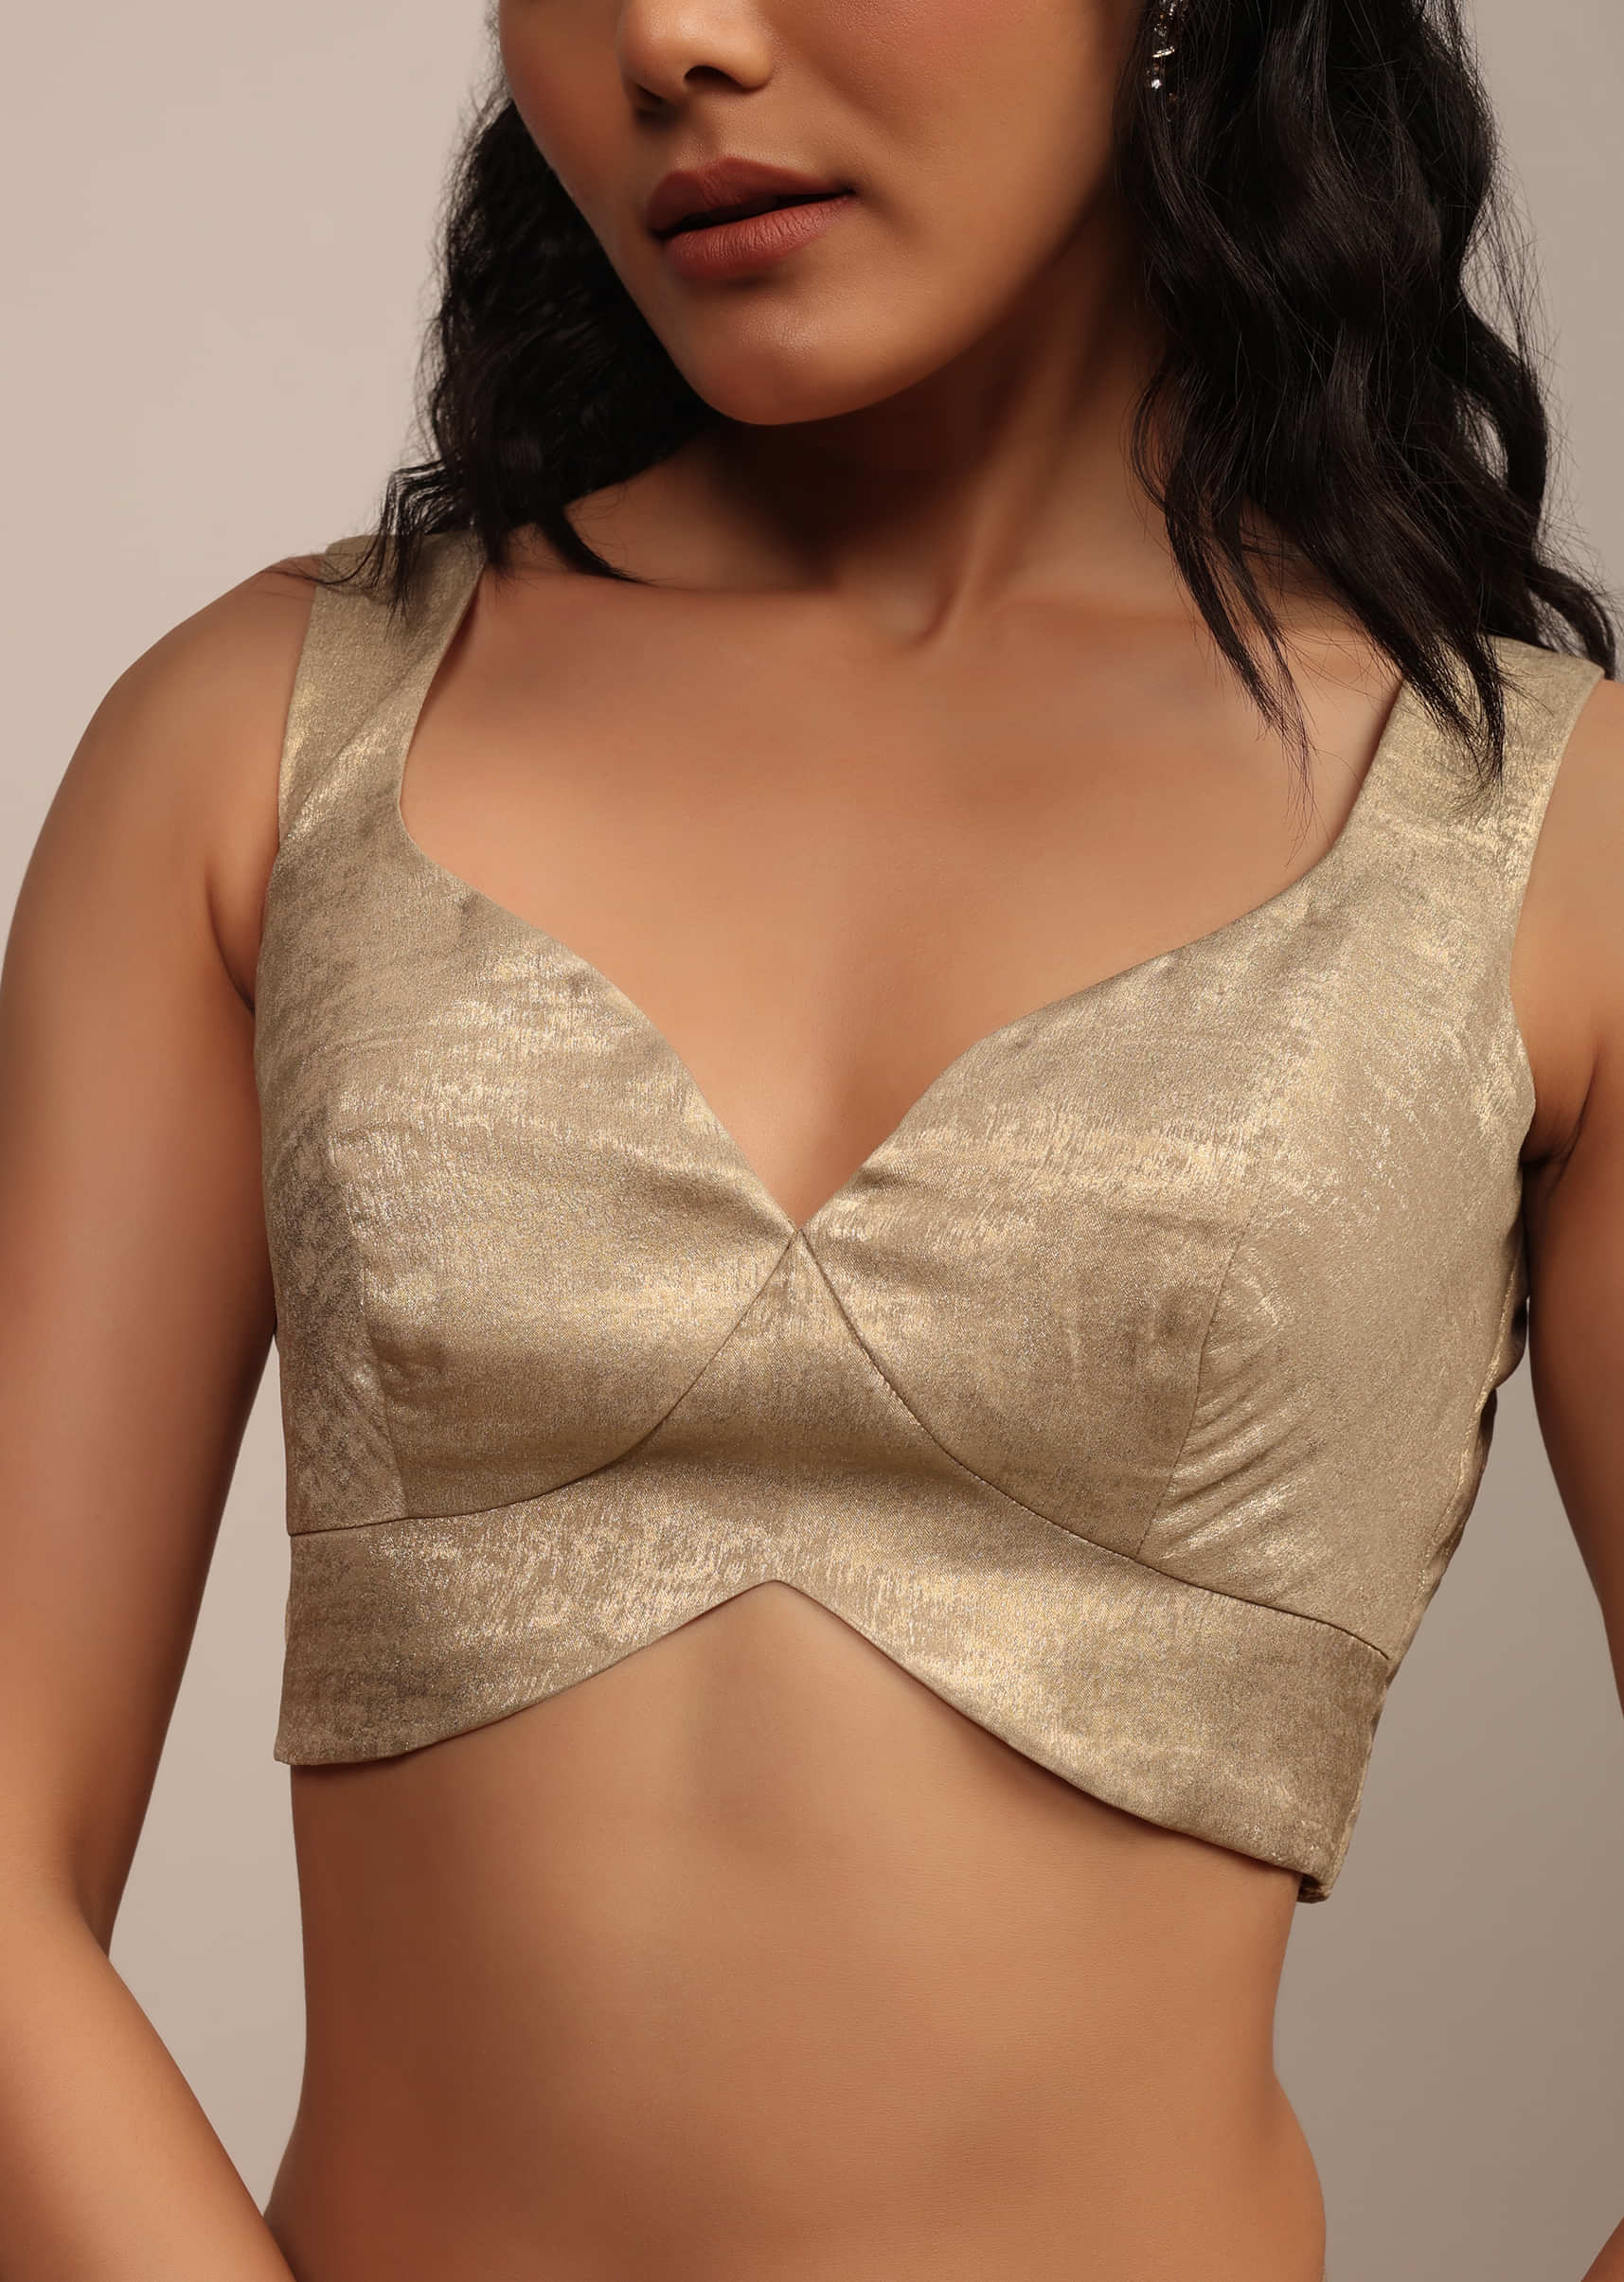 Glam Gold Sleeveless Blouse In Glam Gold With A Sweetheart Neckline